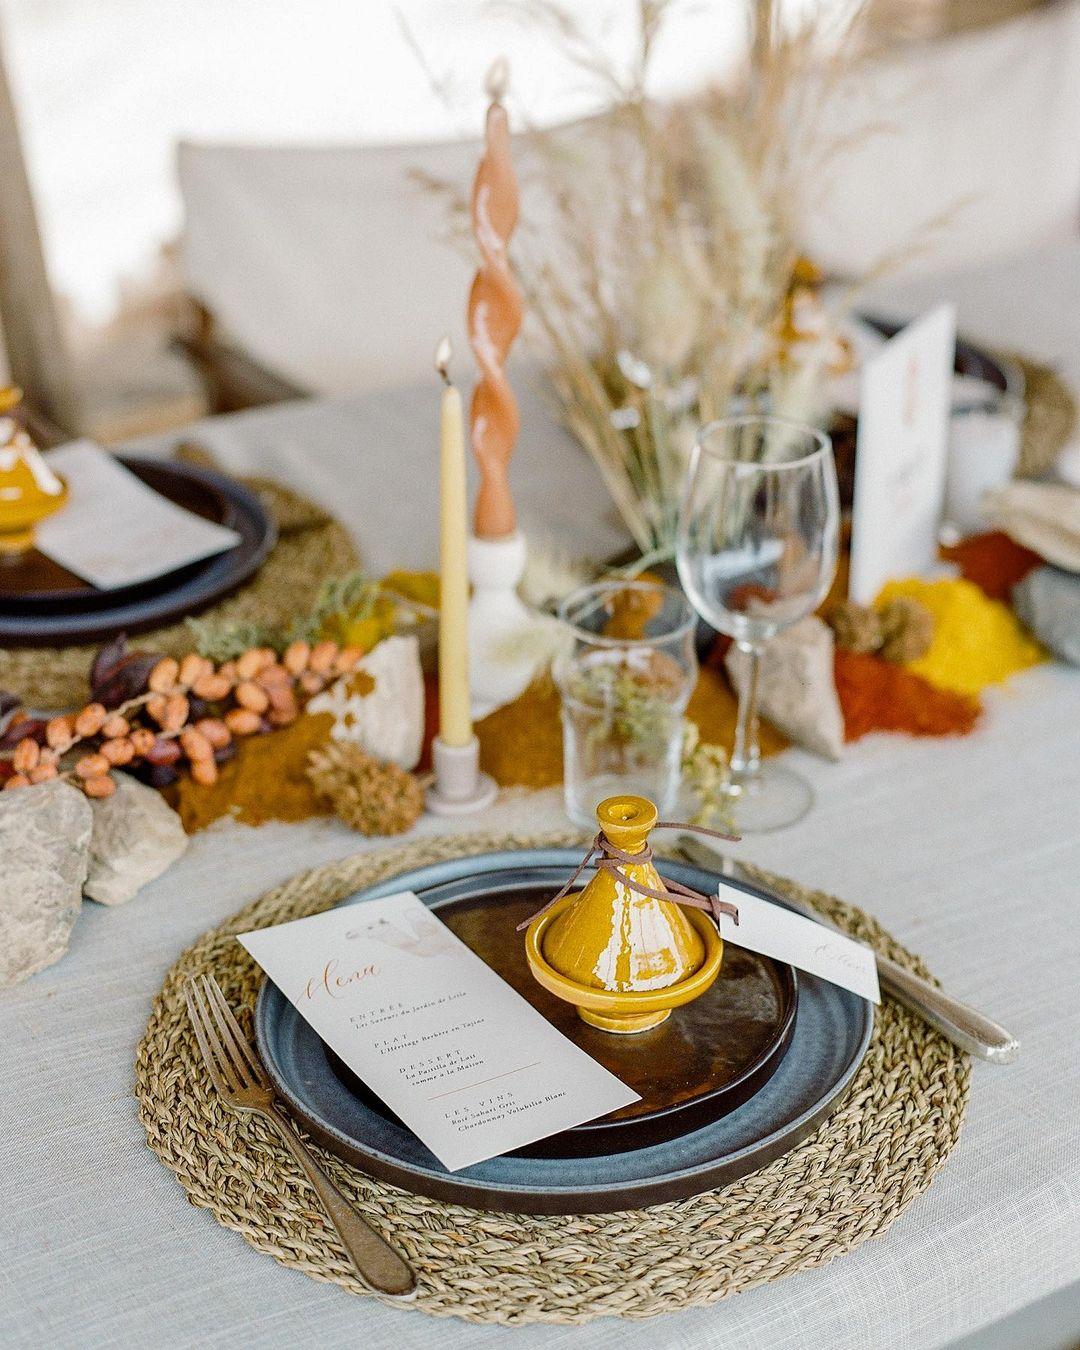 class="content__text"
 Close up on @oliverflyphotography and @studiomcgarry’s spiced up welcome dinner tables in the Moroccan desert - currently on @brides 

@rebeccayale @missrose_by_perrine @whiteedenweddings @cremedepapier 
 